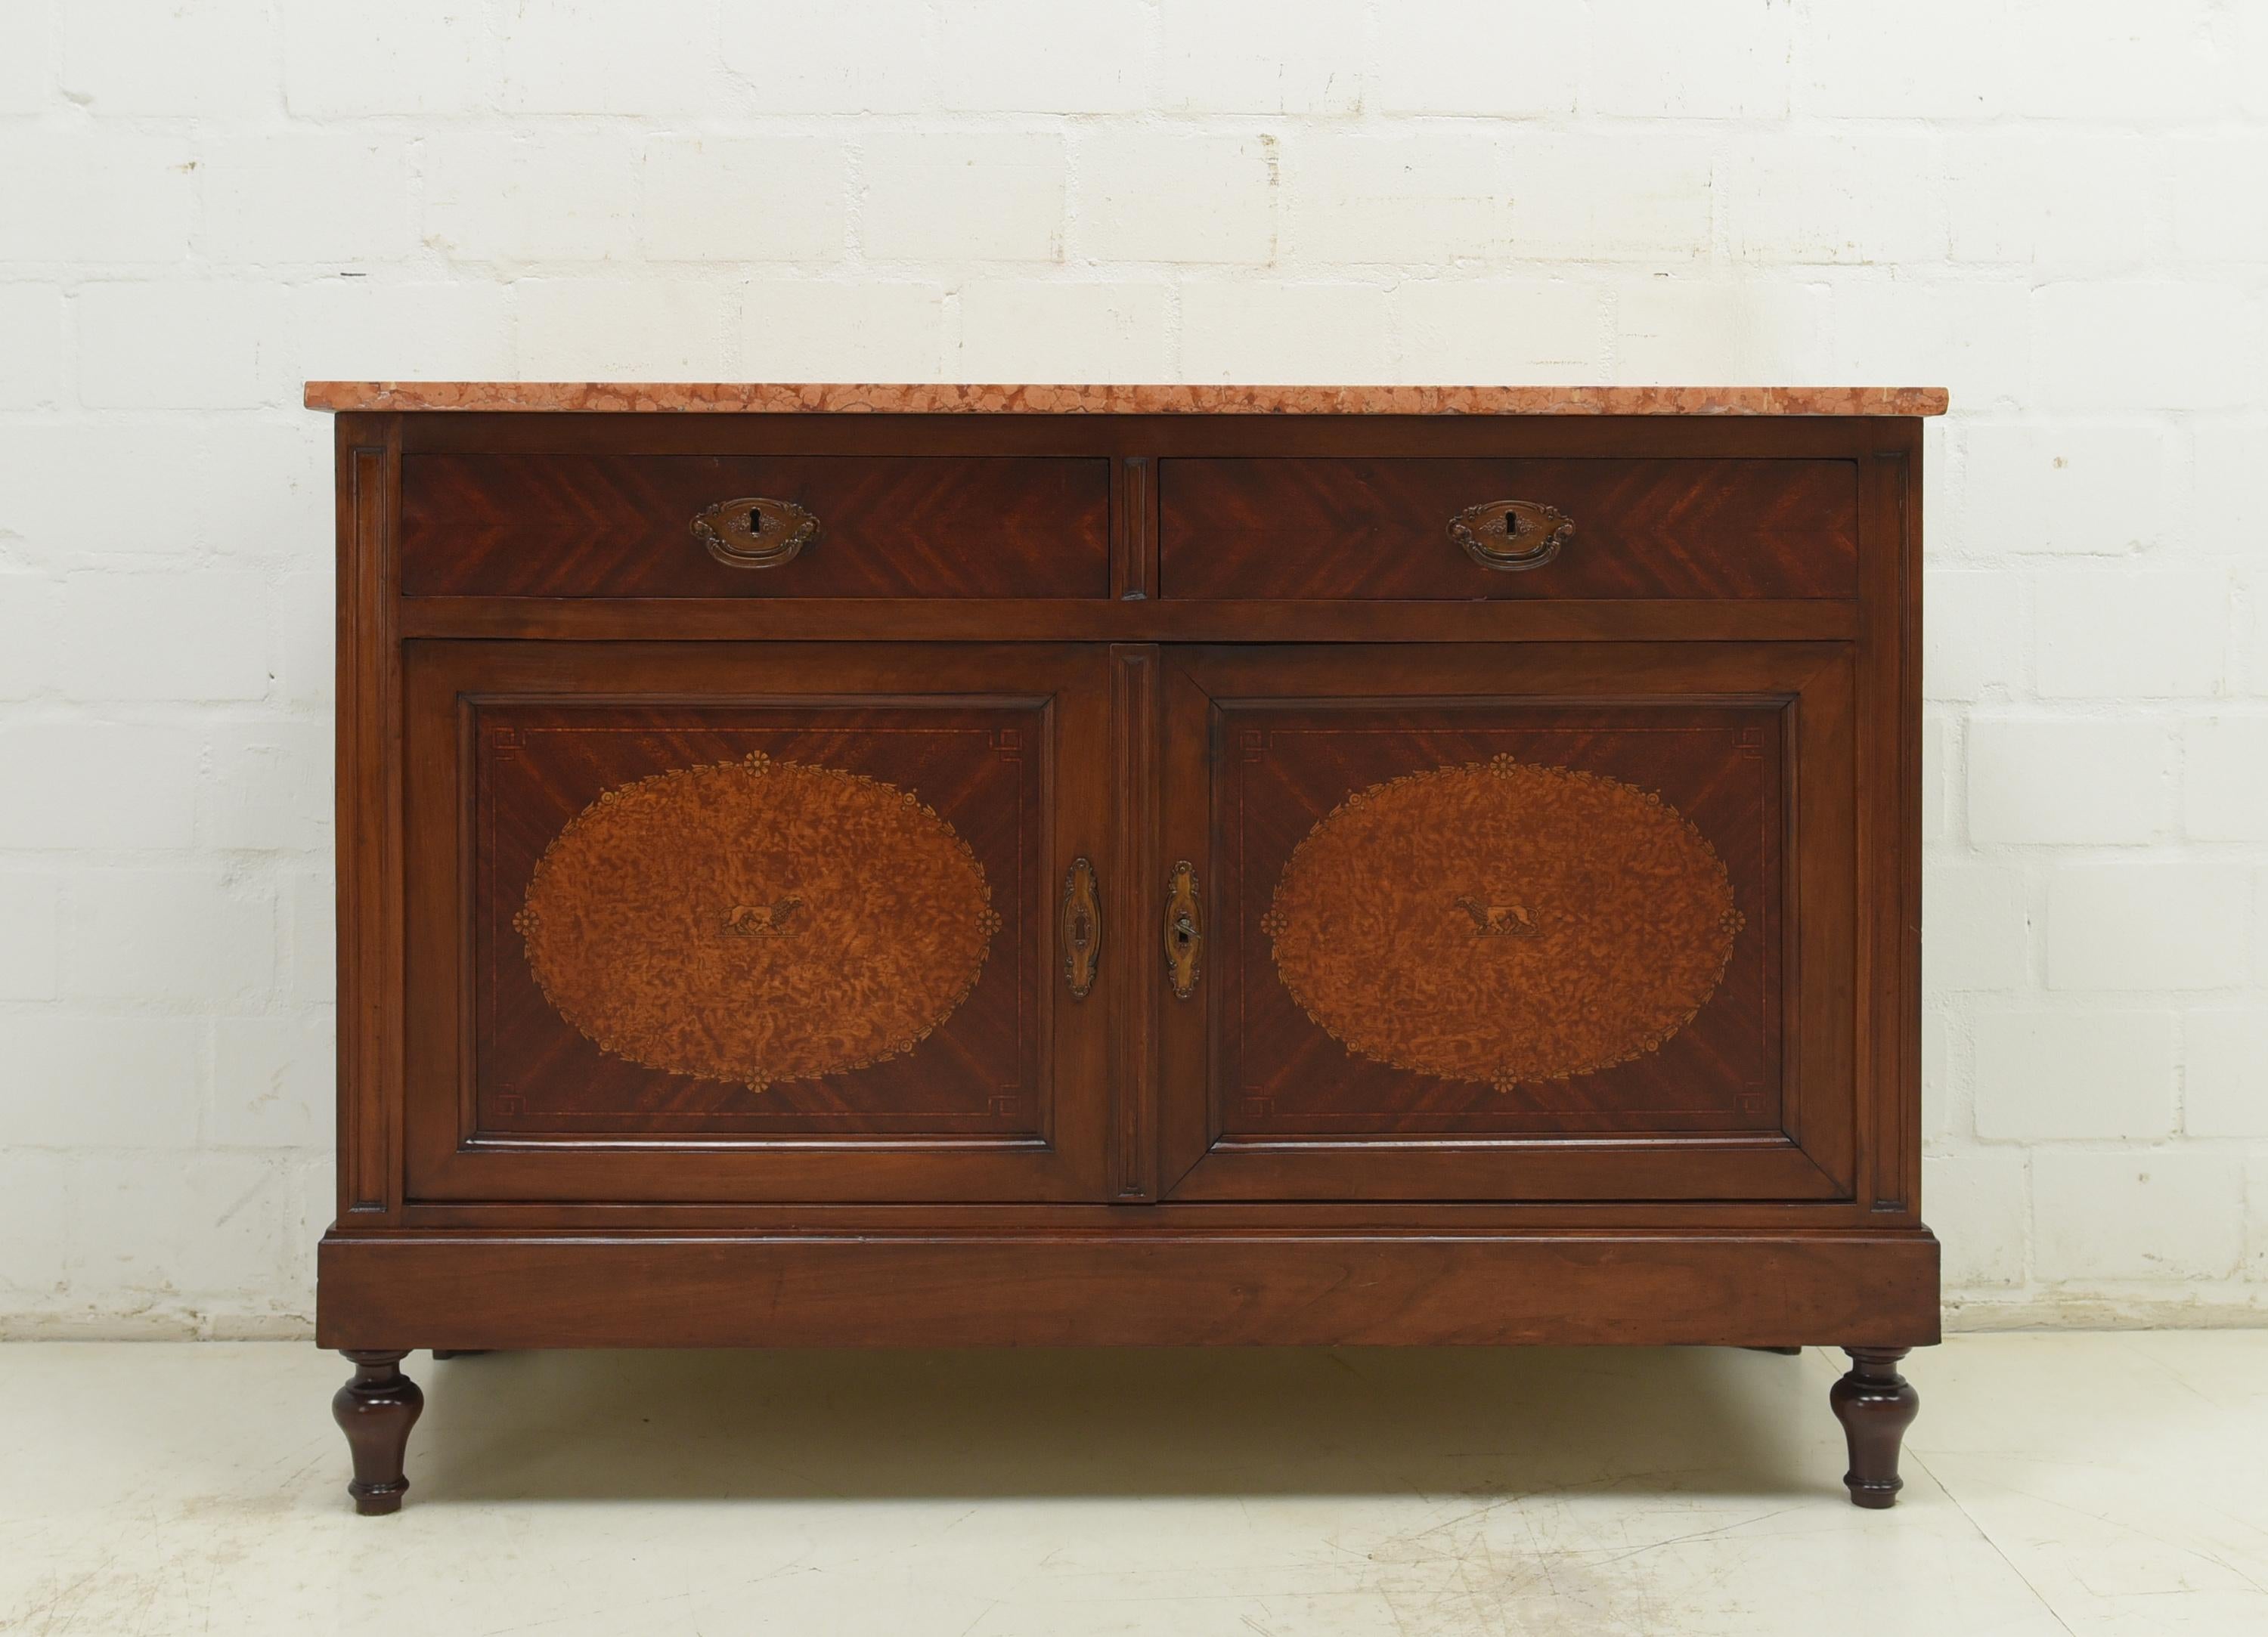 Chest of drawers restored Art Deco circa 1925 mahogany marble cabinet

Features:
High-quality veneer with root wood
Original fittings
Rose marble top with slight damage
Attractive model

Additional information:
Material: Mahogany, part